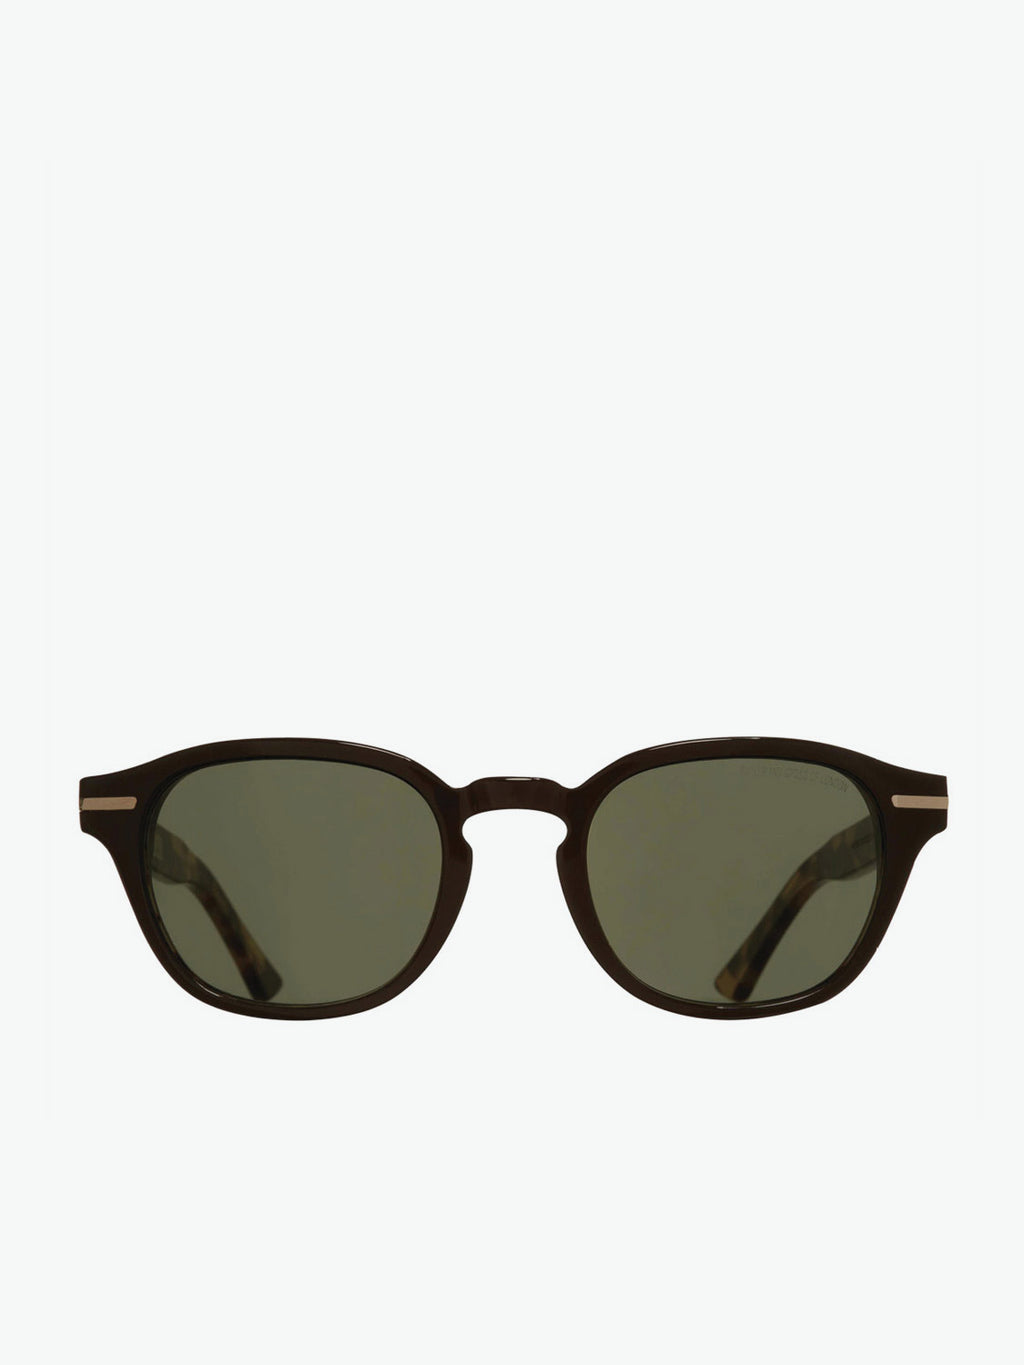 Cutler and Gross Round-Frame Black Taxi and Camo Acetate Sunglasses | A